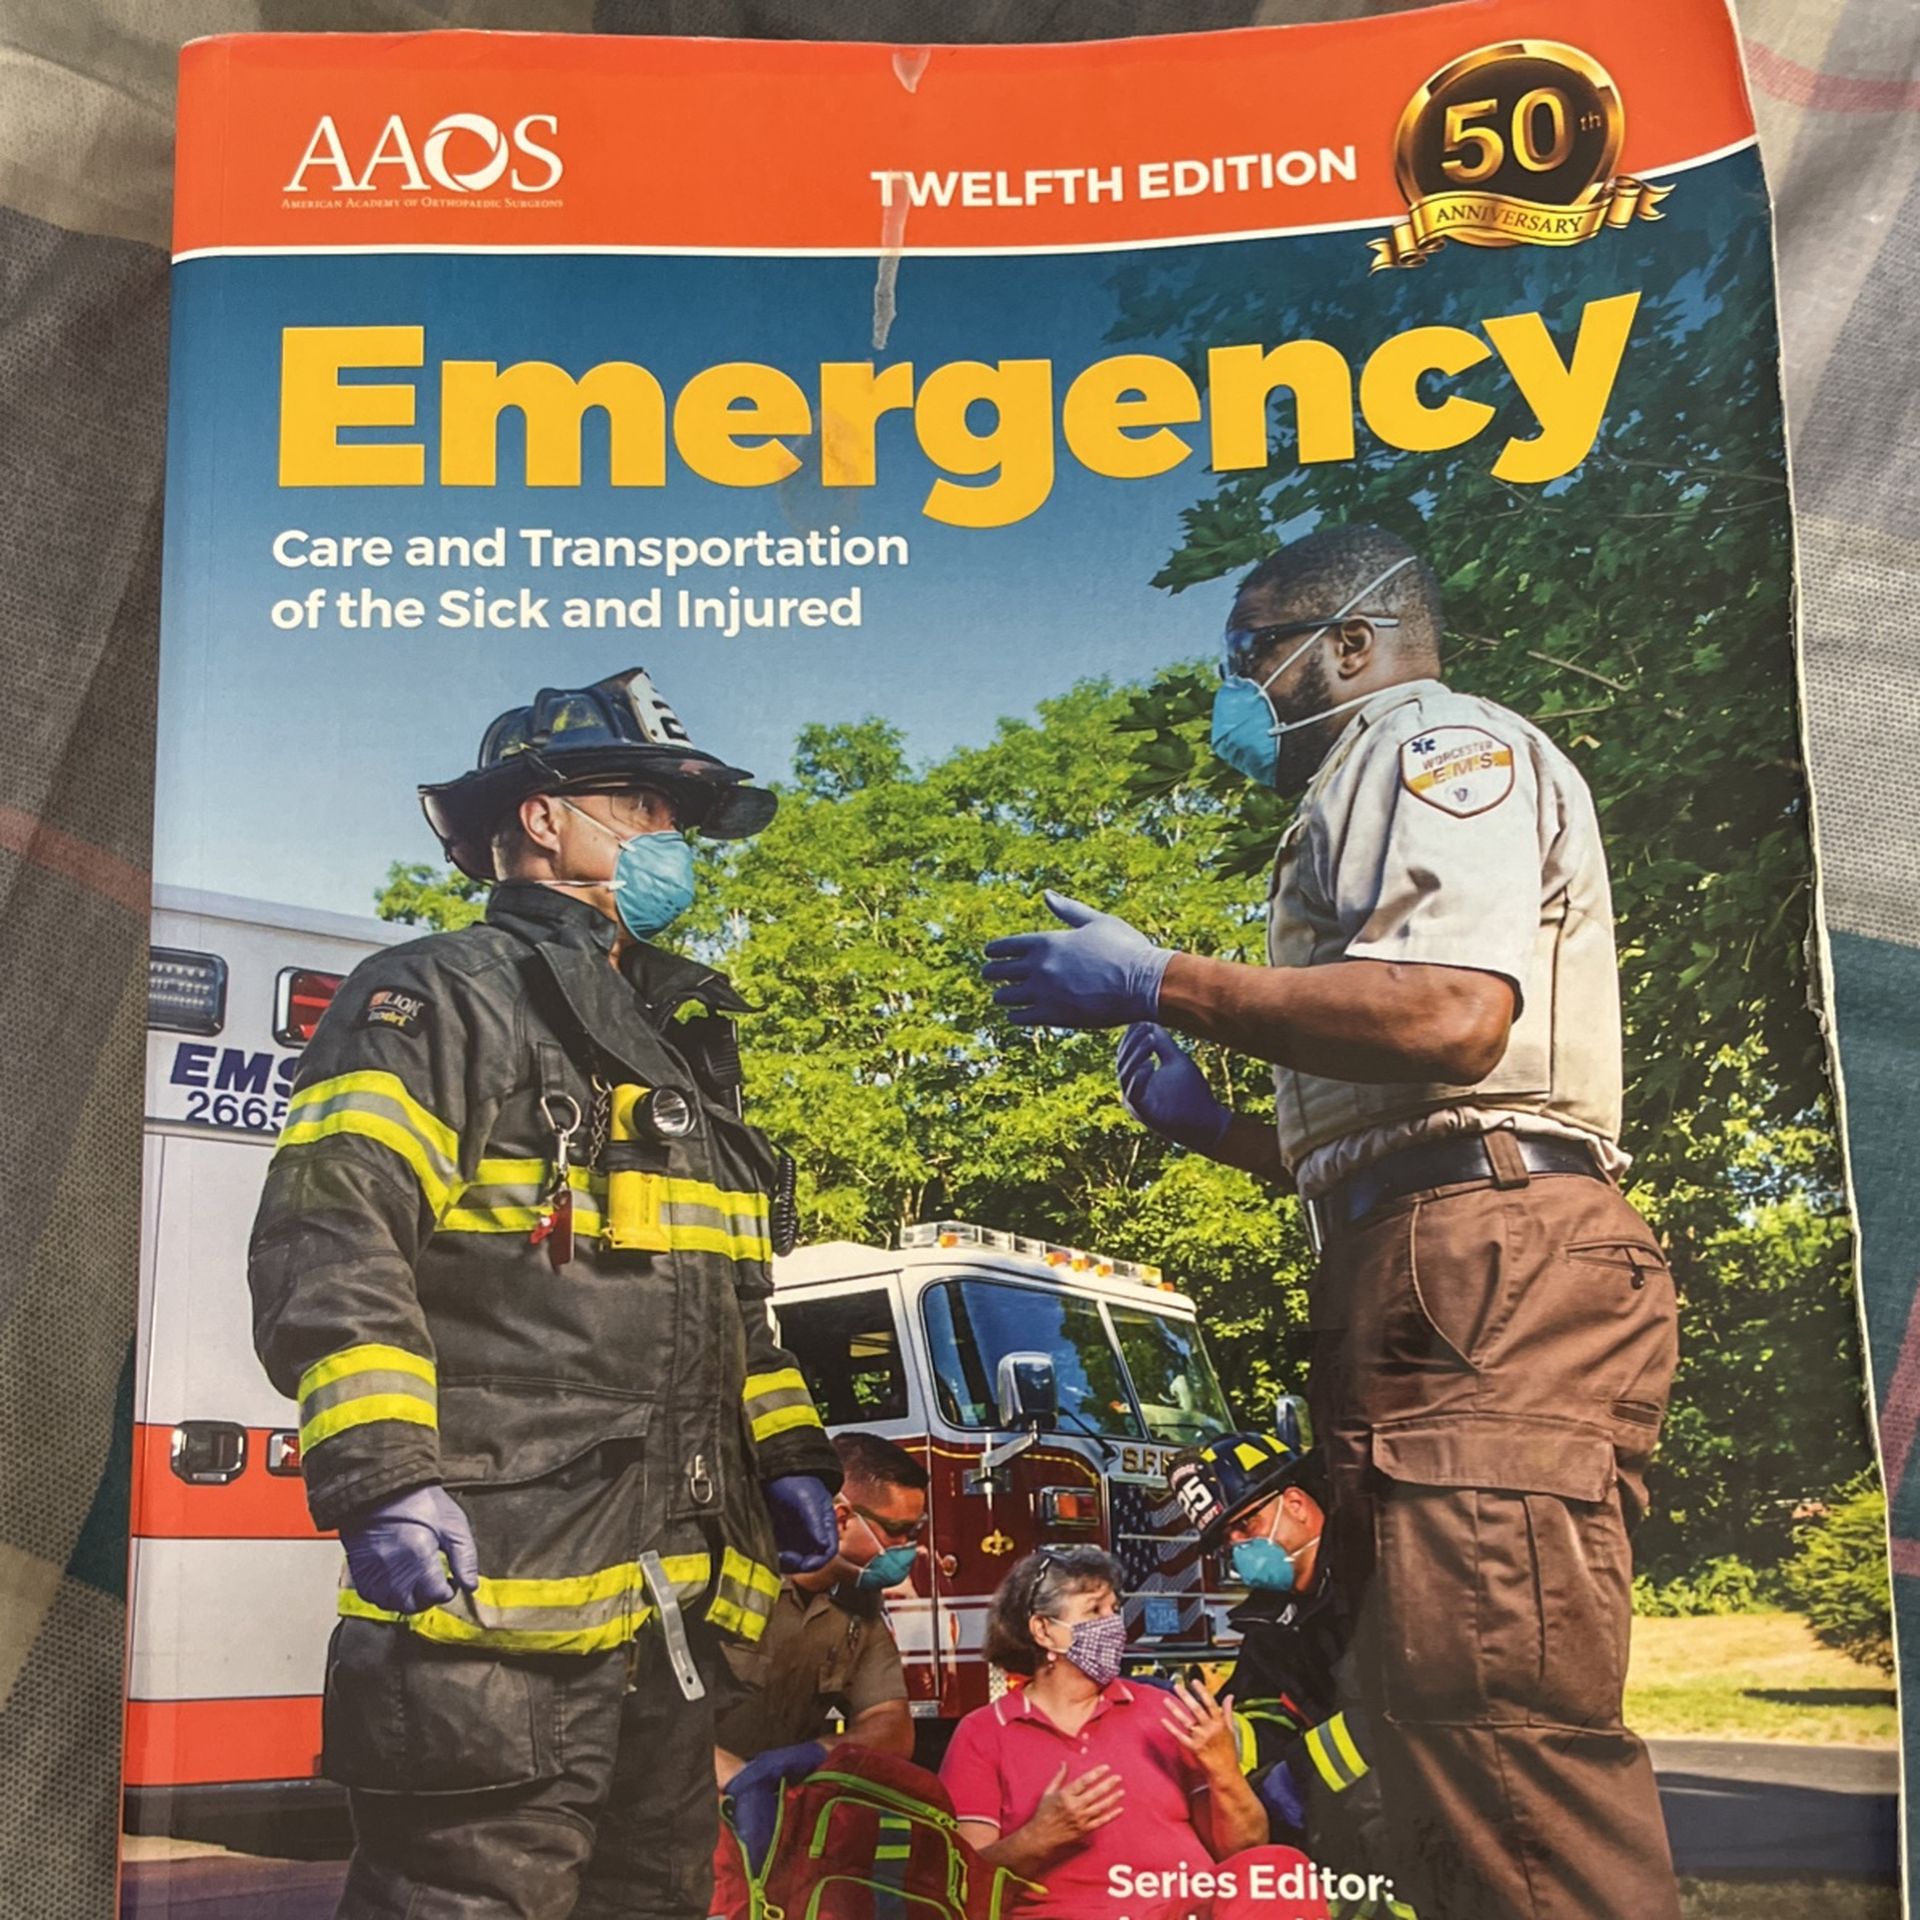 Emergency care and transportation of the sick and injured 12th edition - AAOS